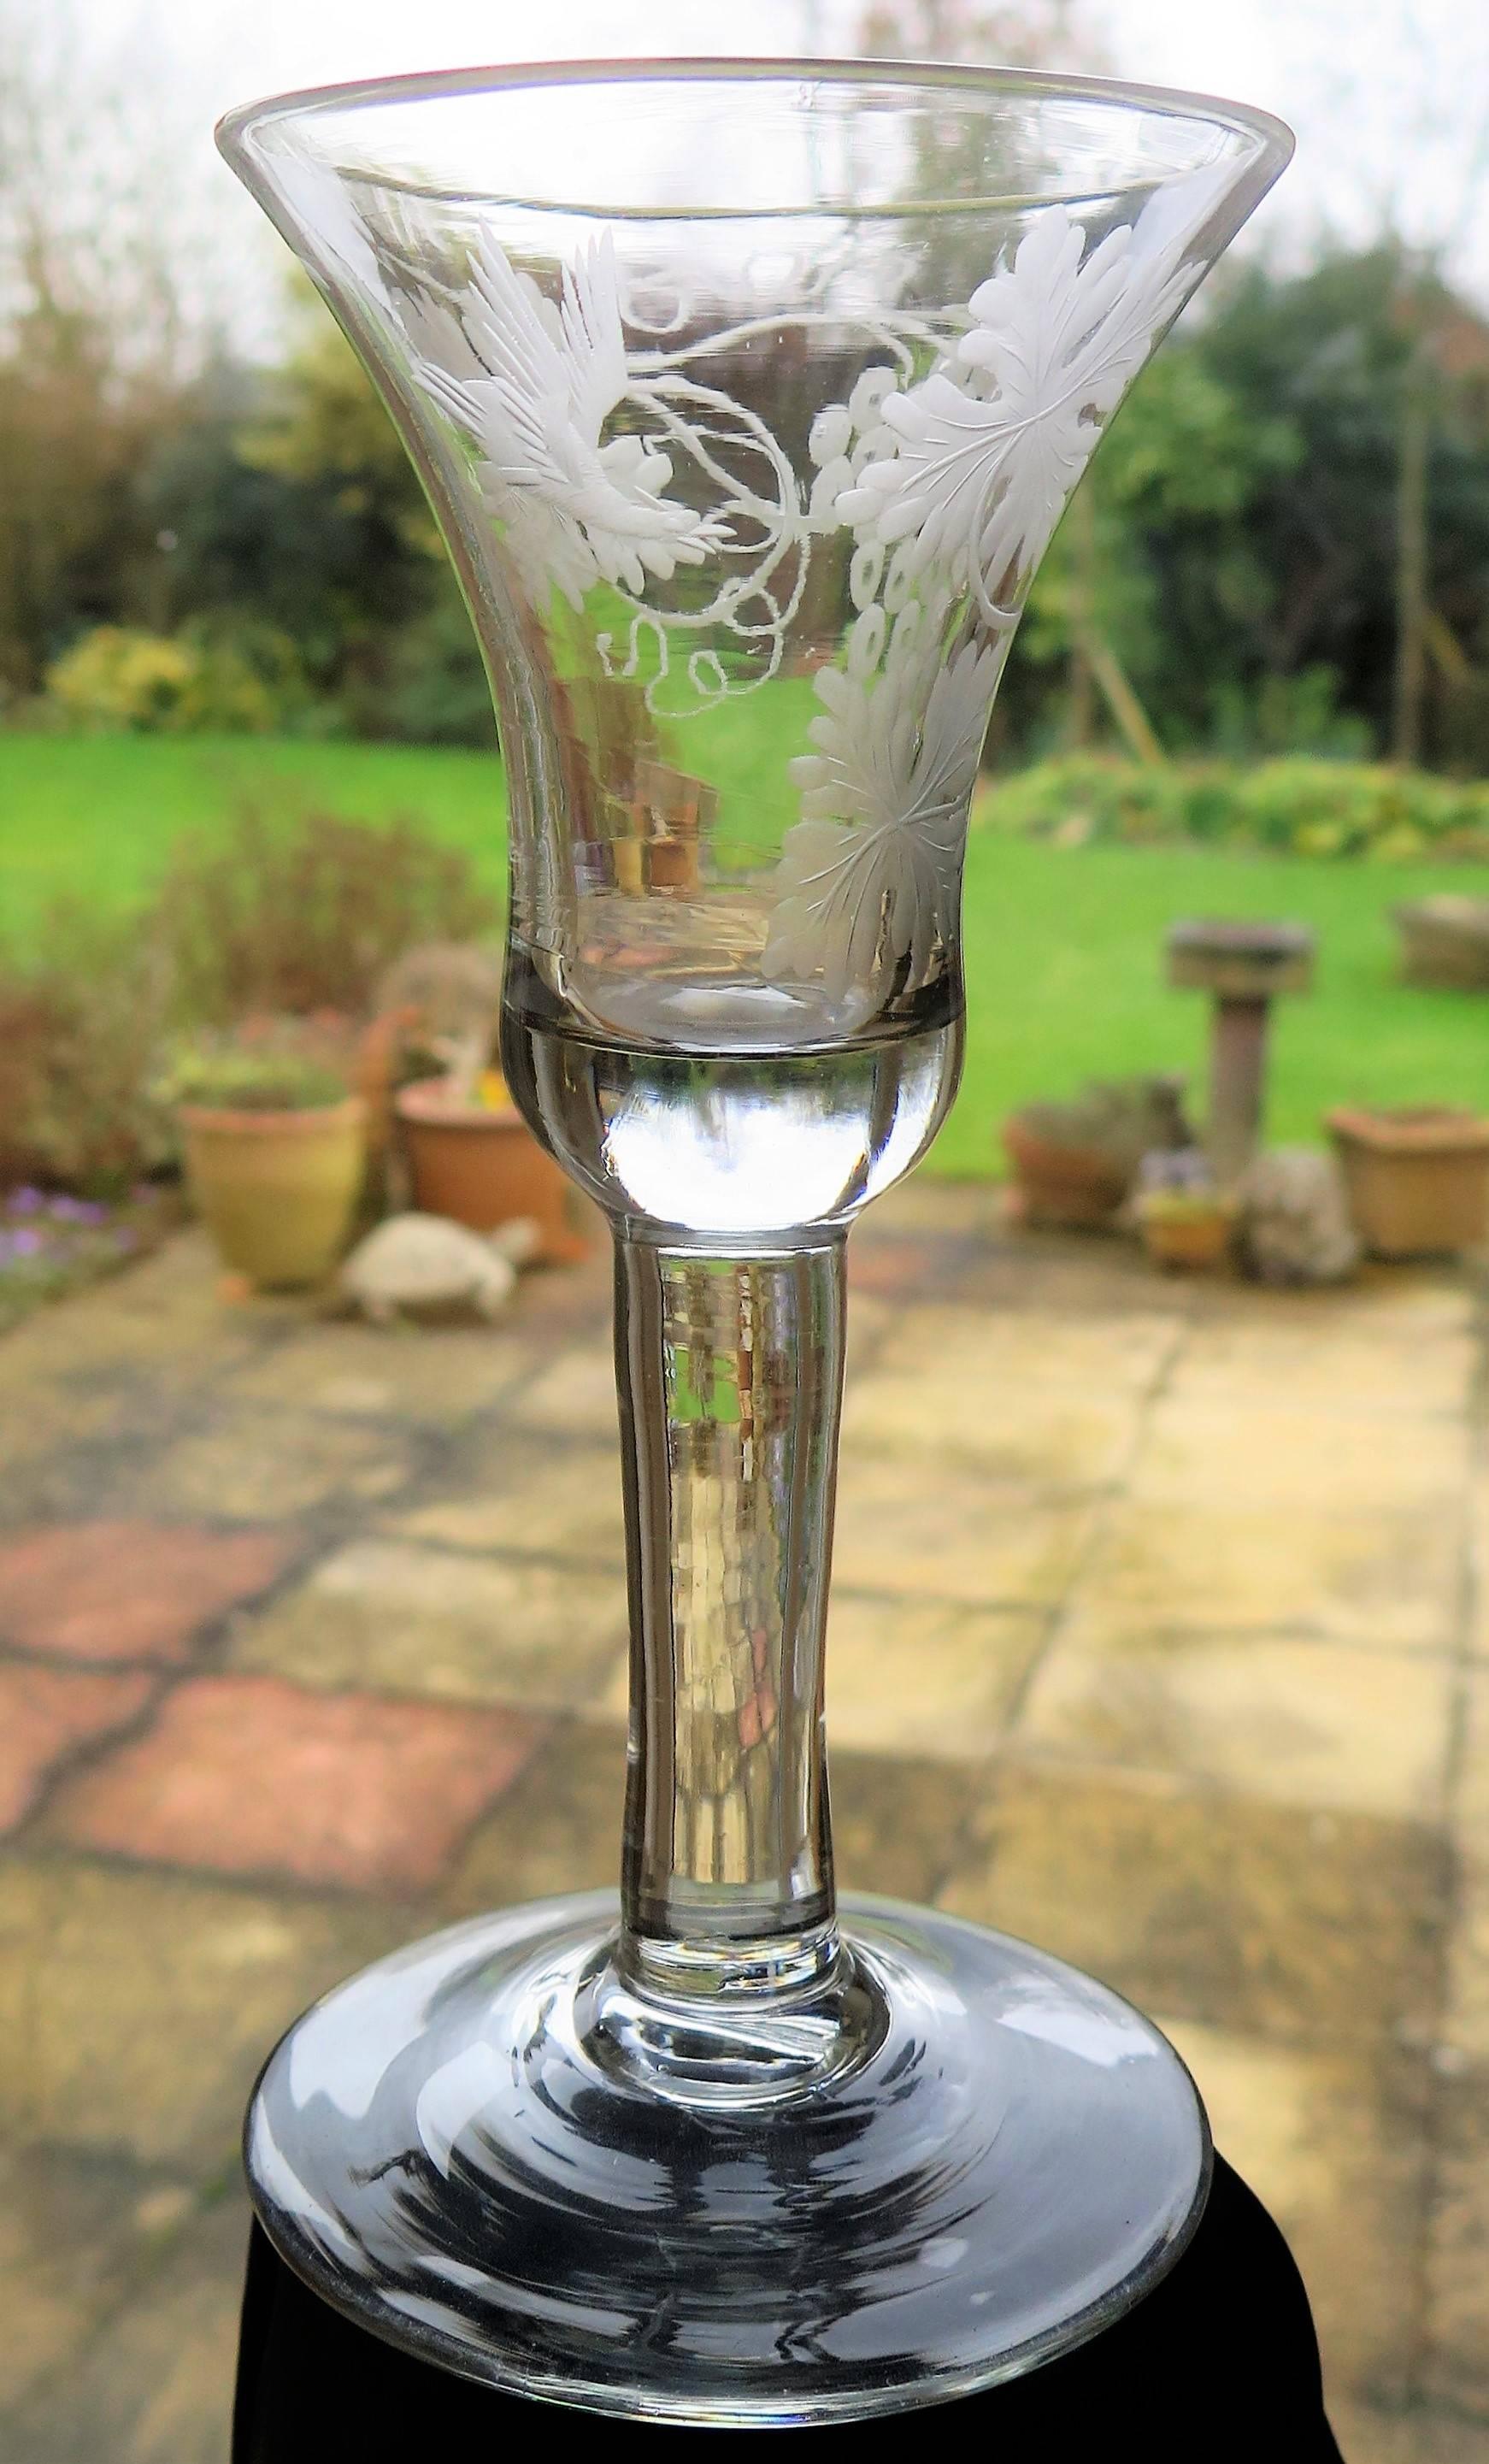 This is a very good English, Georgian, Hand-blown, Engraved Wine drinking glass, dating to the George II Period of the mid-18th century, circa 1745.

These glasses are very collectable.

This wine glass is handblown from English lead glass. It is